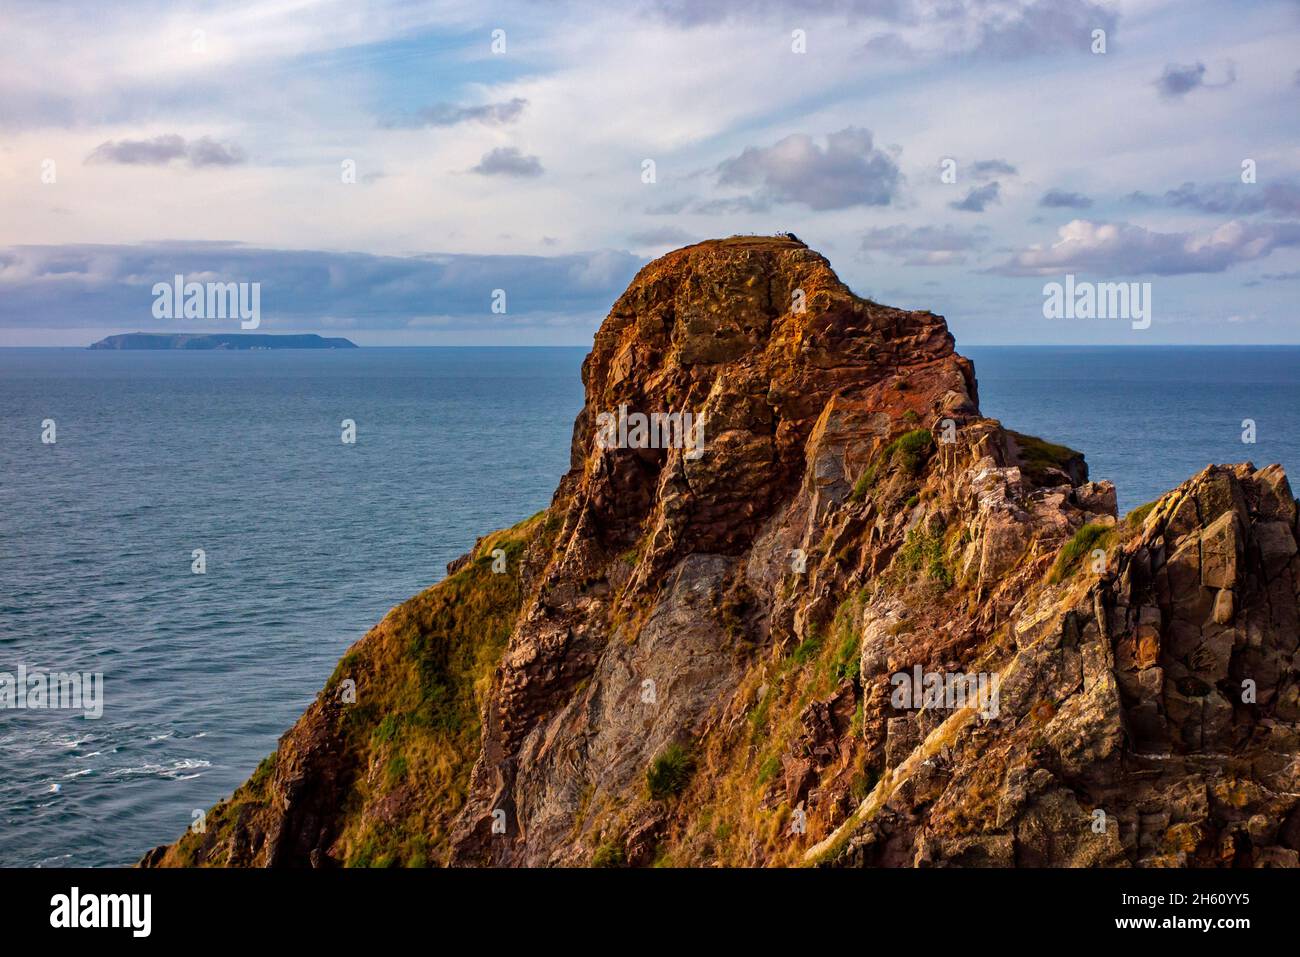 The rocky summit of Hartland Point in North Devon England UK with Lundy Island and the Bristol Channel visible in the horizon in the distance. Stock Photo